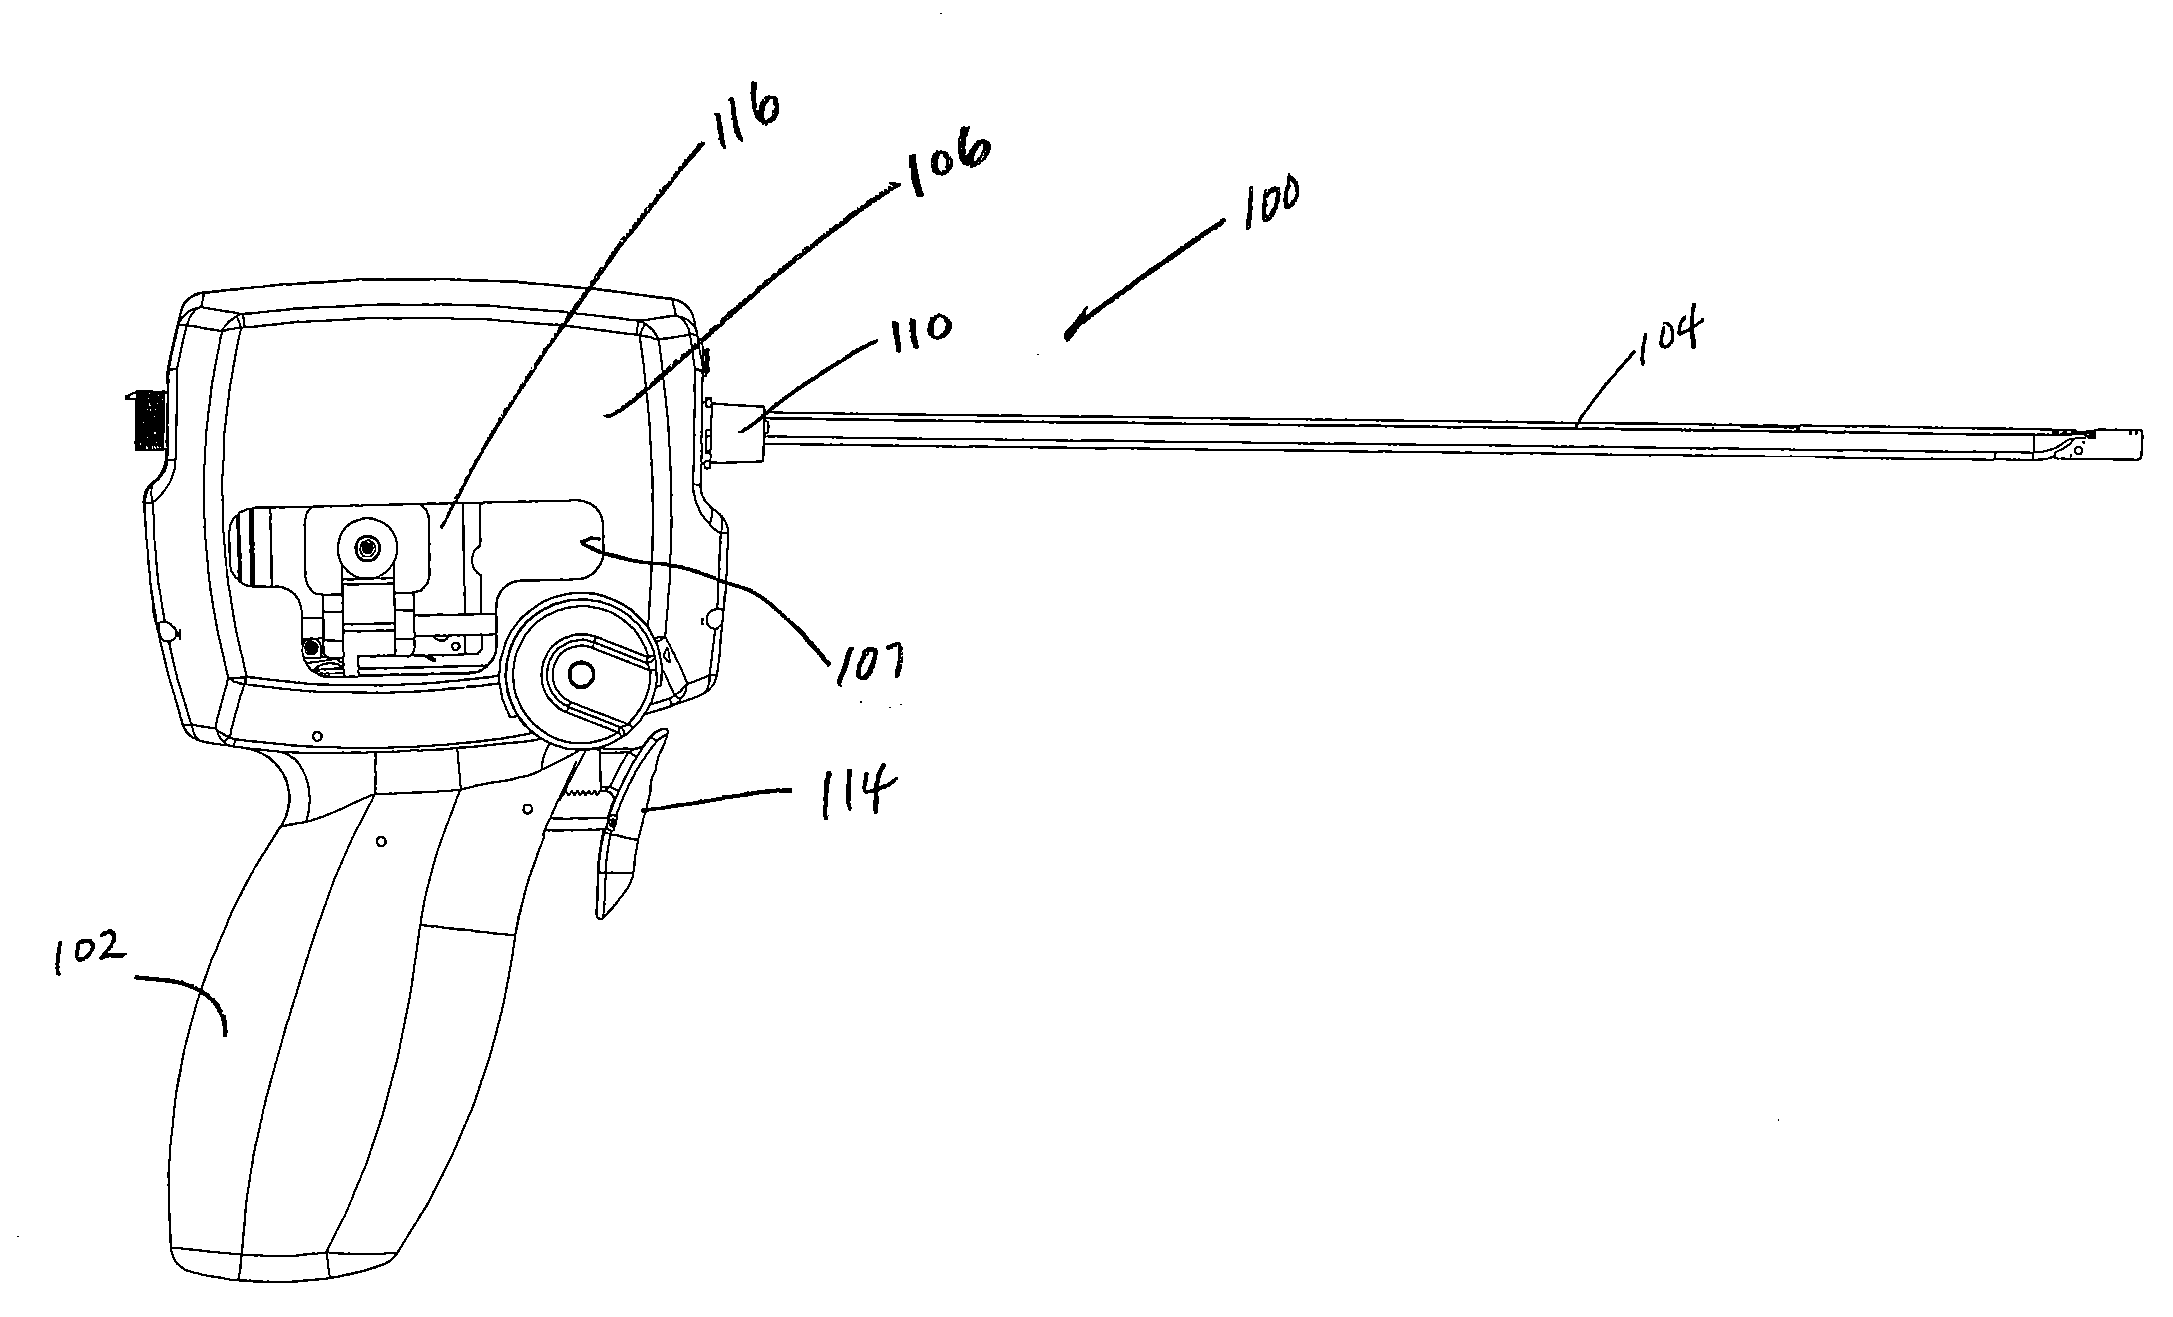 Multi-actuating trigger anchor delivery system